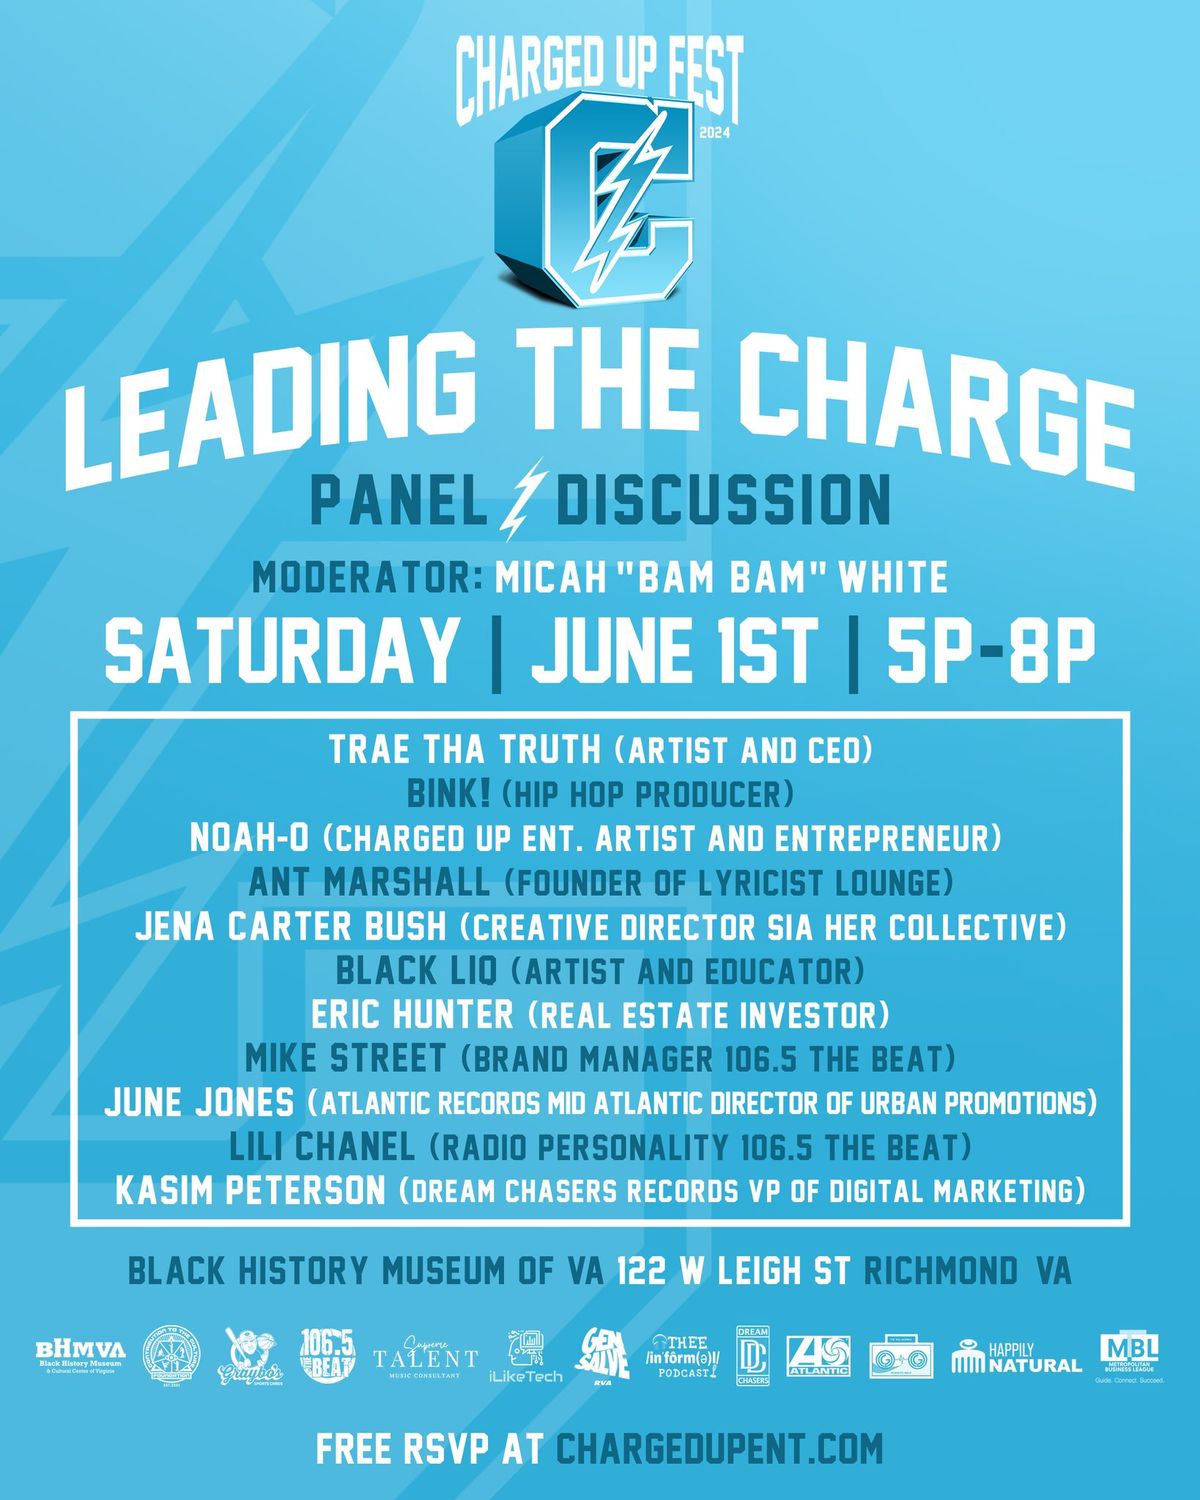 CHARGED UP FEST : "LEADING THE CHARGE" PANEL DISCUSSION